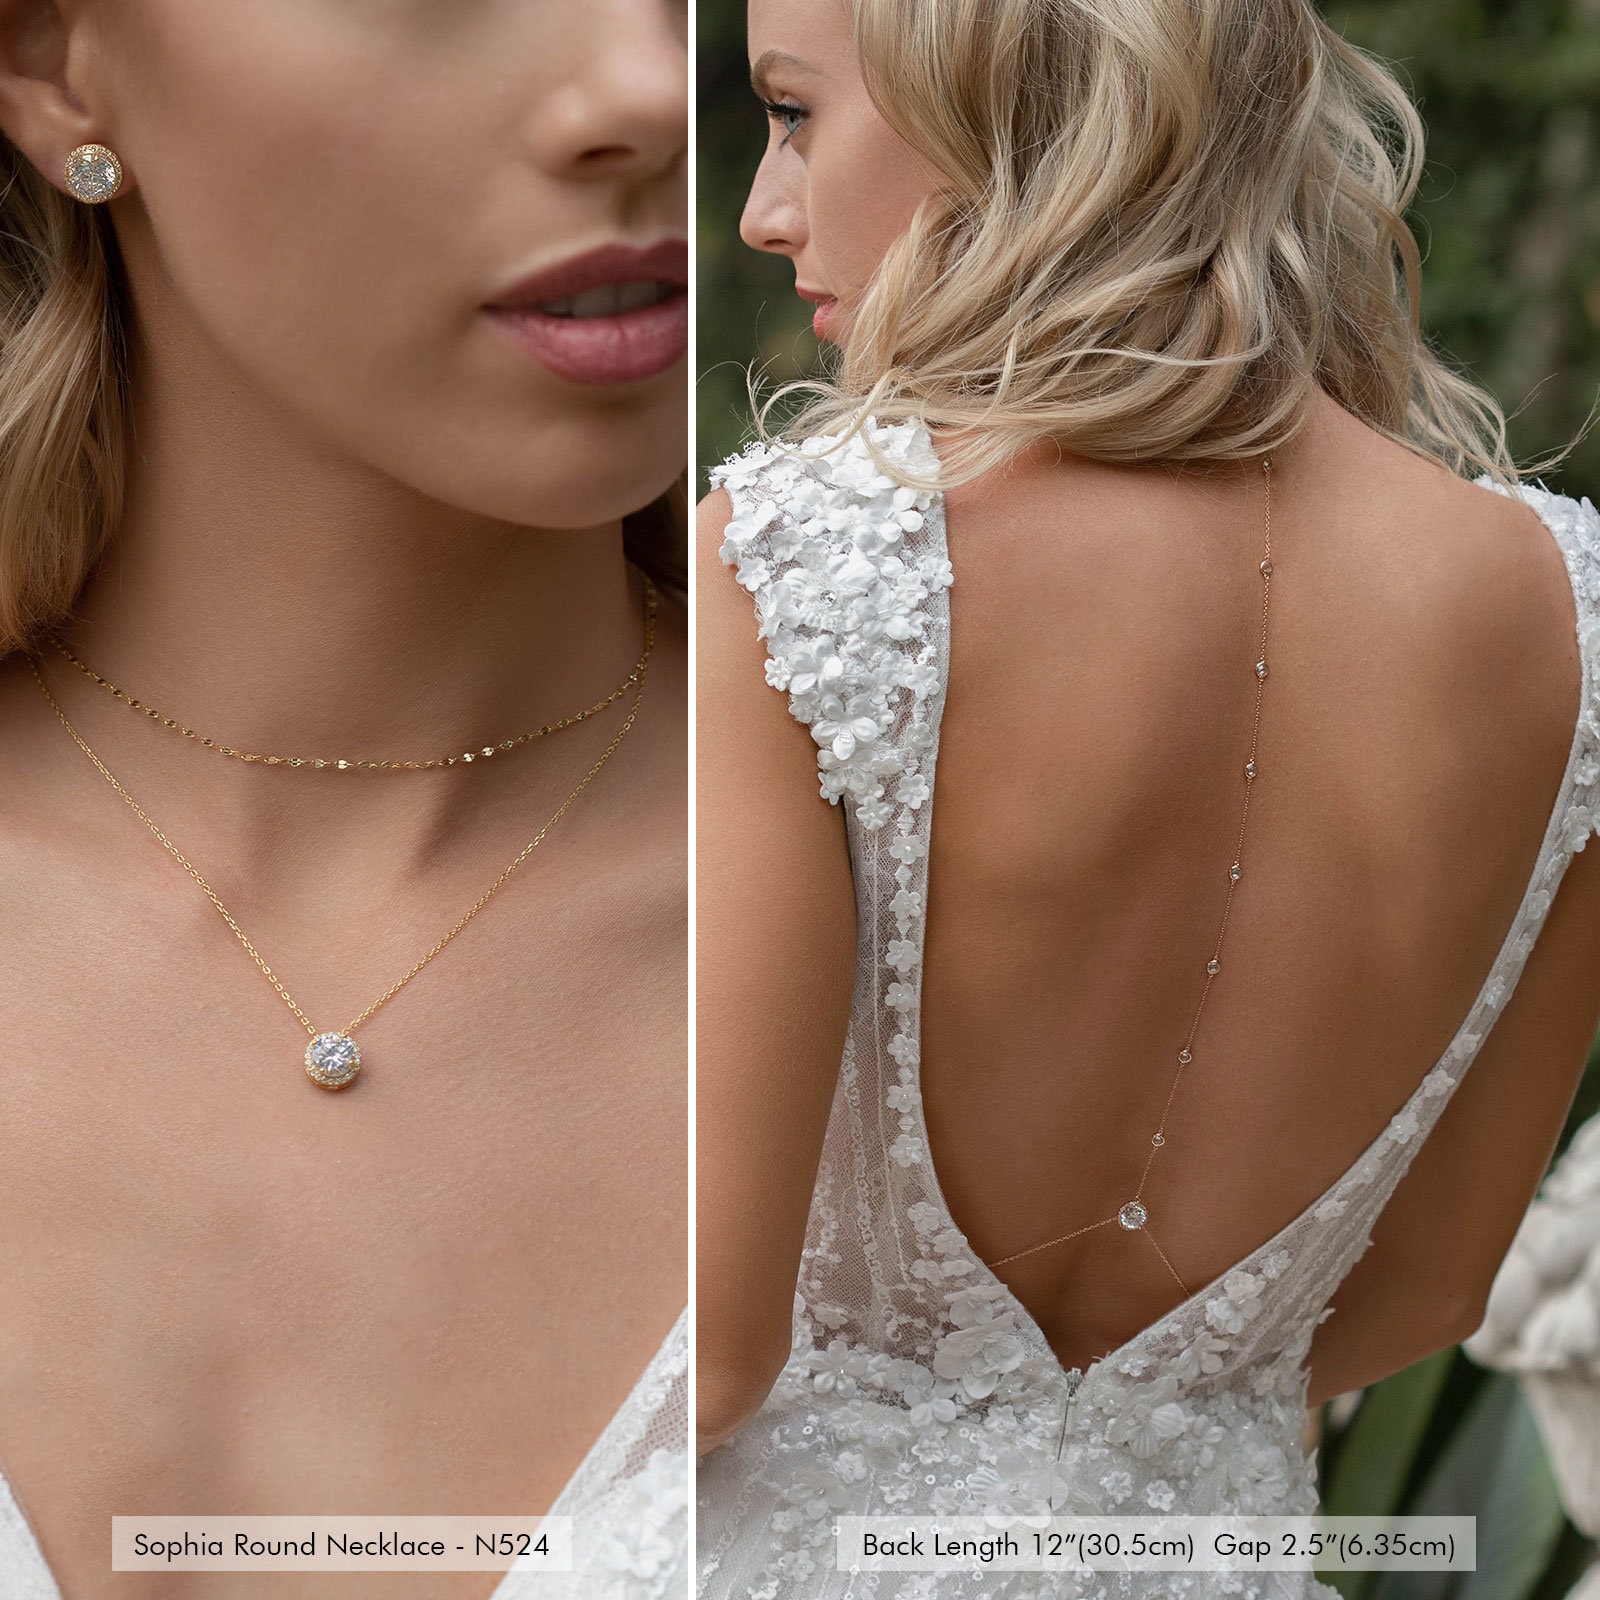 Long necklace bridal open back dress necklace bare wedding backless –  Kathleen Barry Bespoke Occasion Accessories